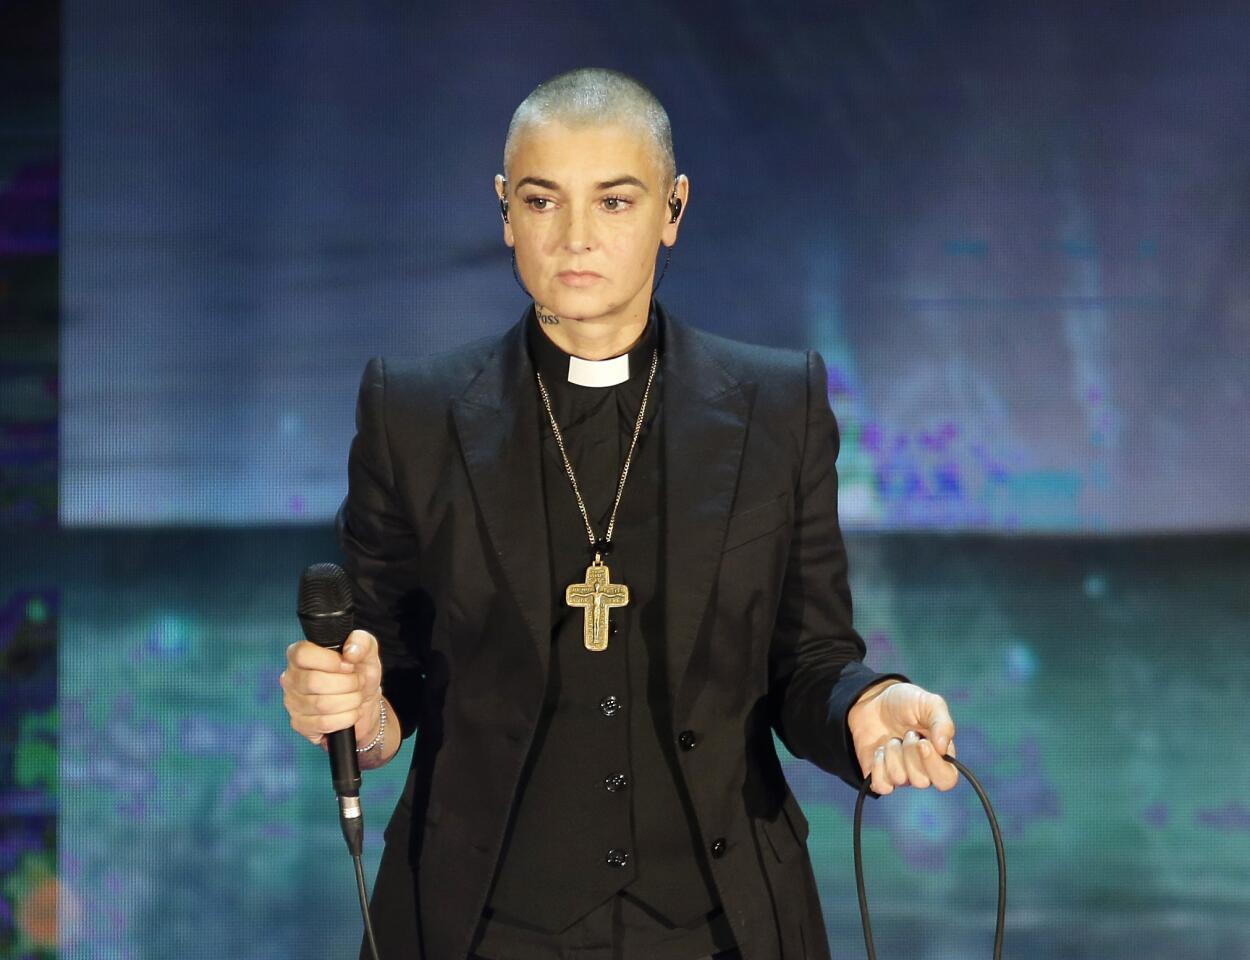 Sinead O'Connor: Career in pictures